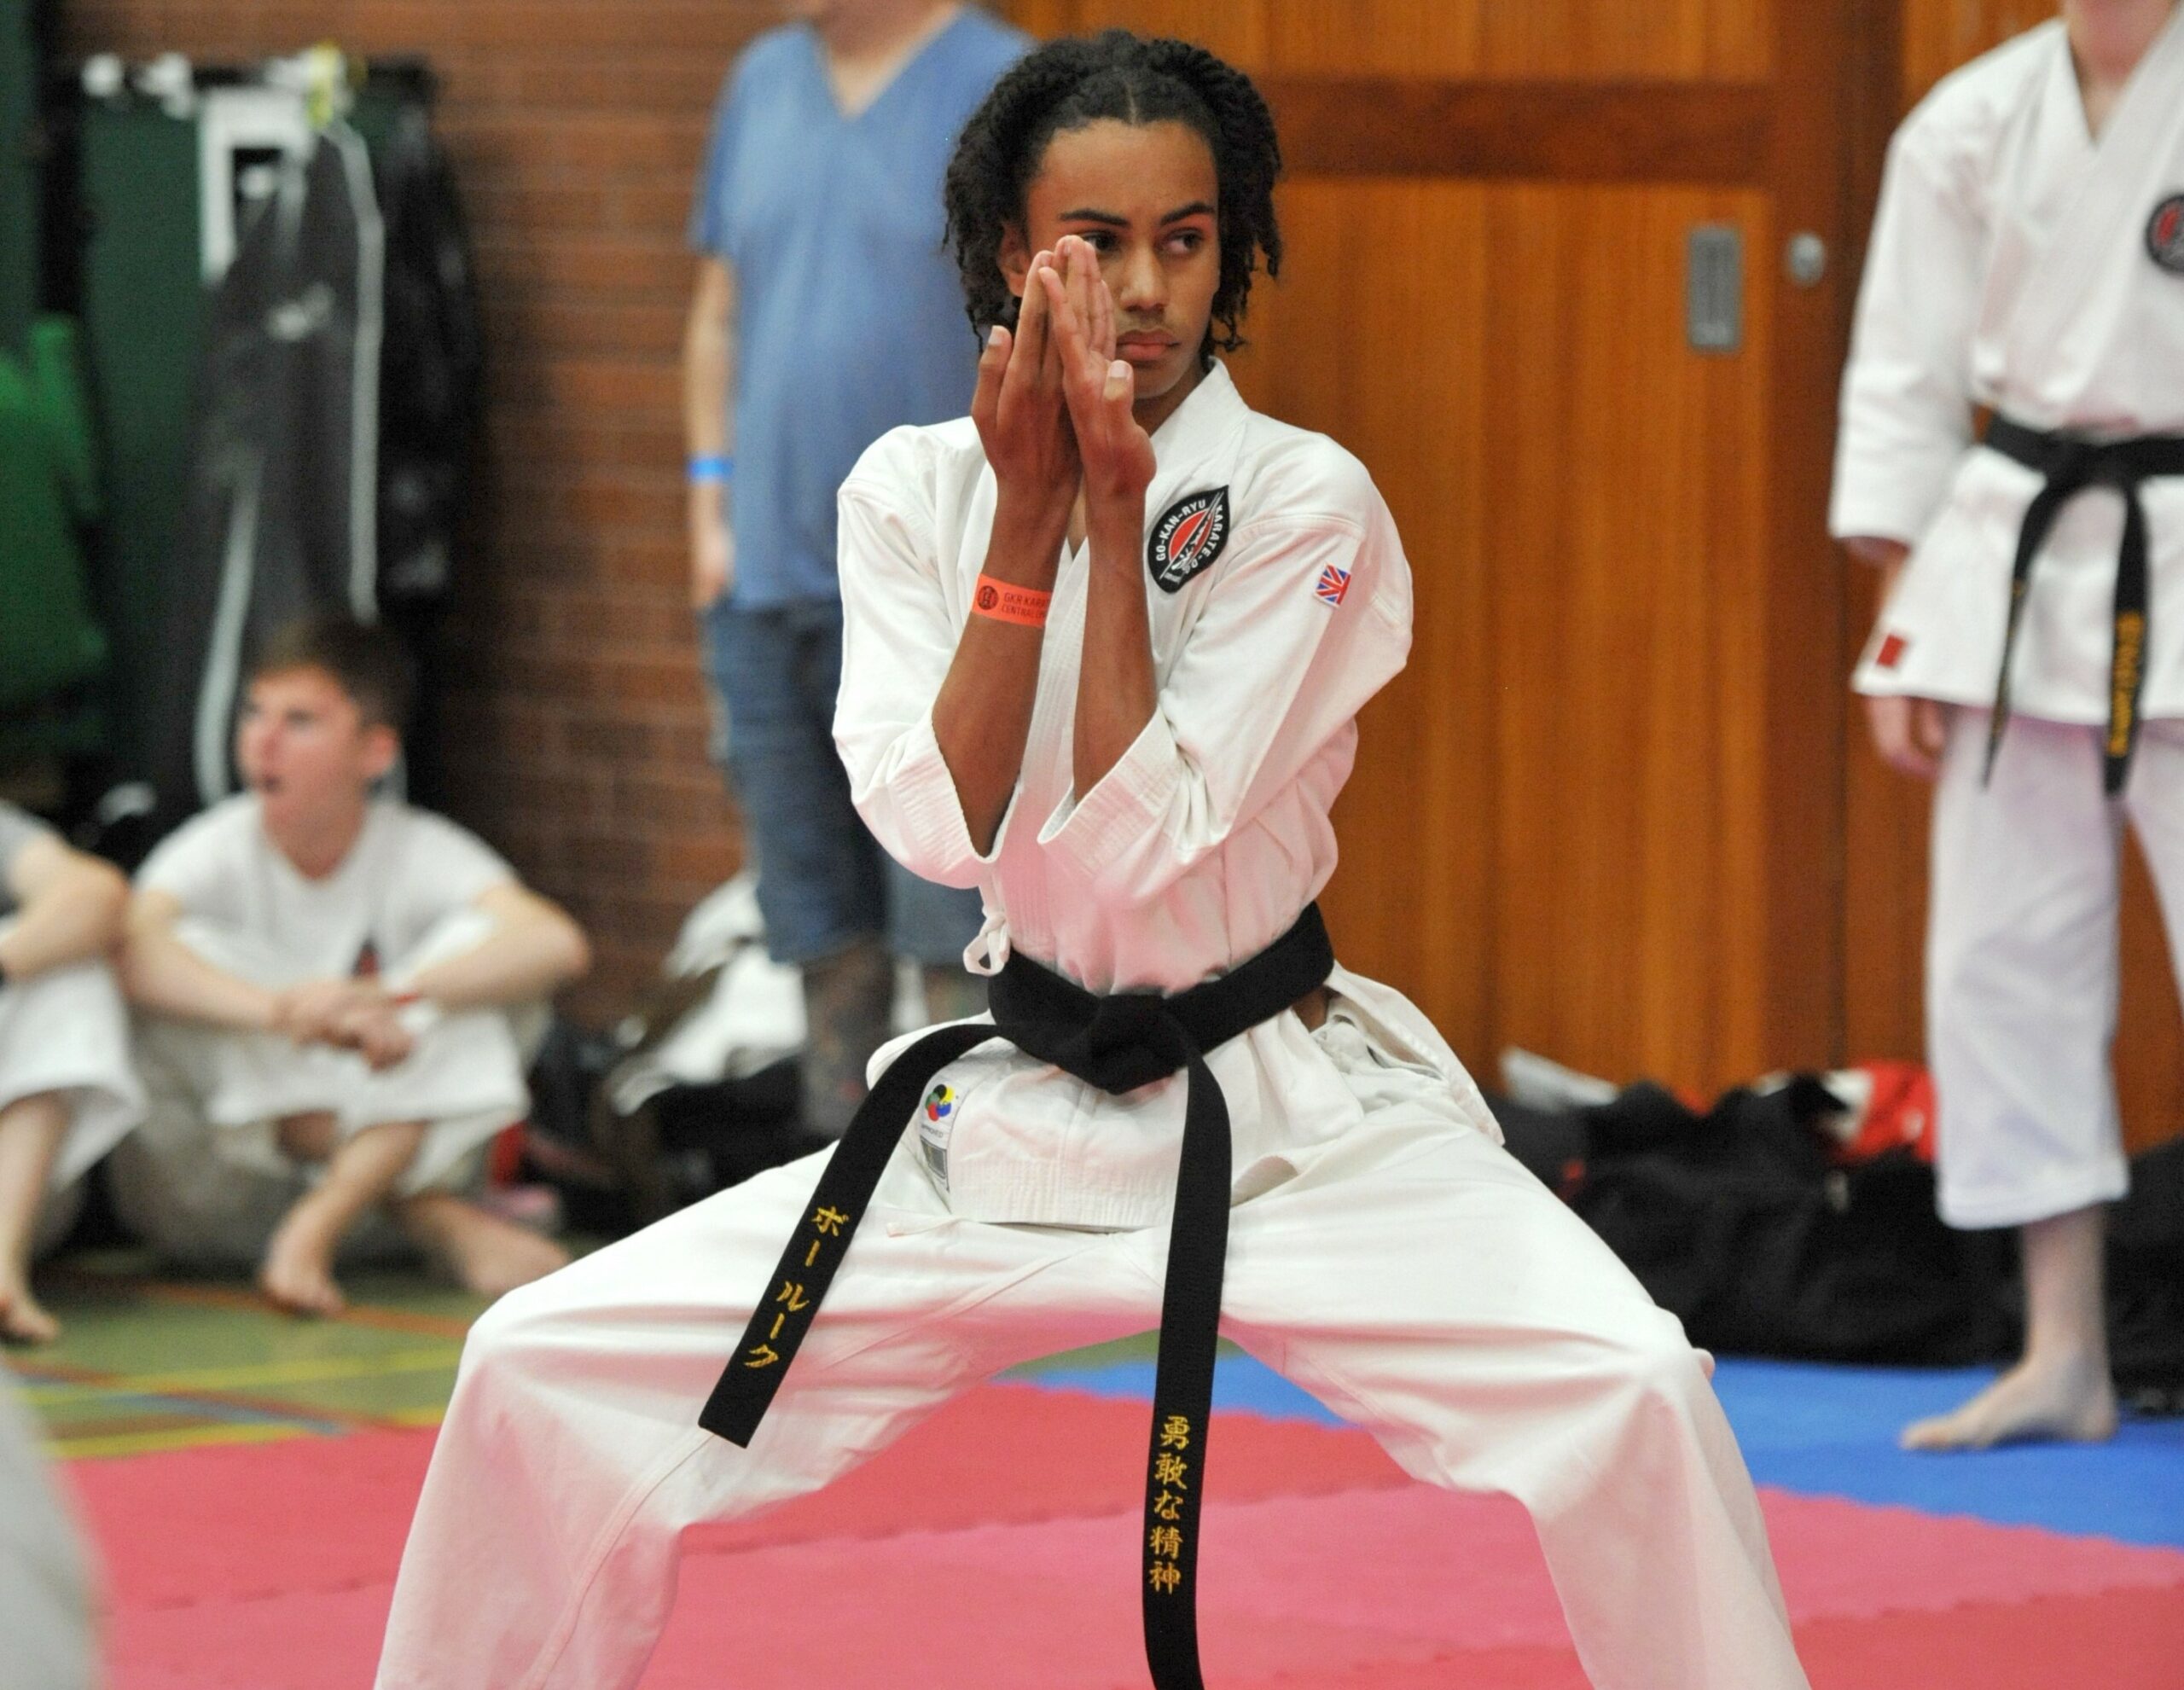 A focused young karateka with long hair is captured in a deep stance, performing a hand technique with intense concentration. Wearing a white gi and a black belt, the practitioner's gaze is directed forward, exuding calm and discipline. In the background, observers and fellow competitors are seated around the edge of the red and blue matted area of the dojo